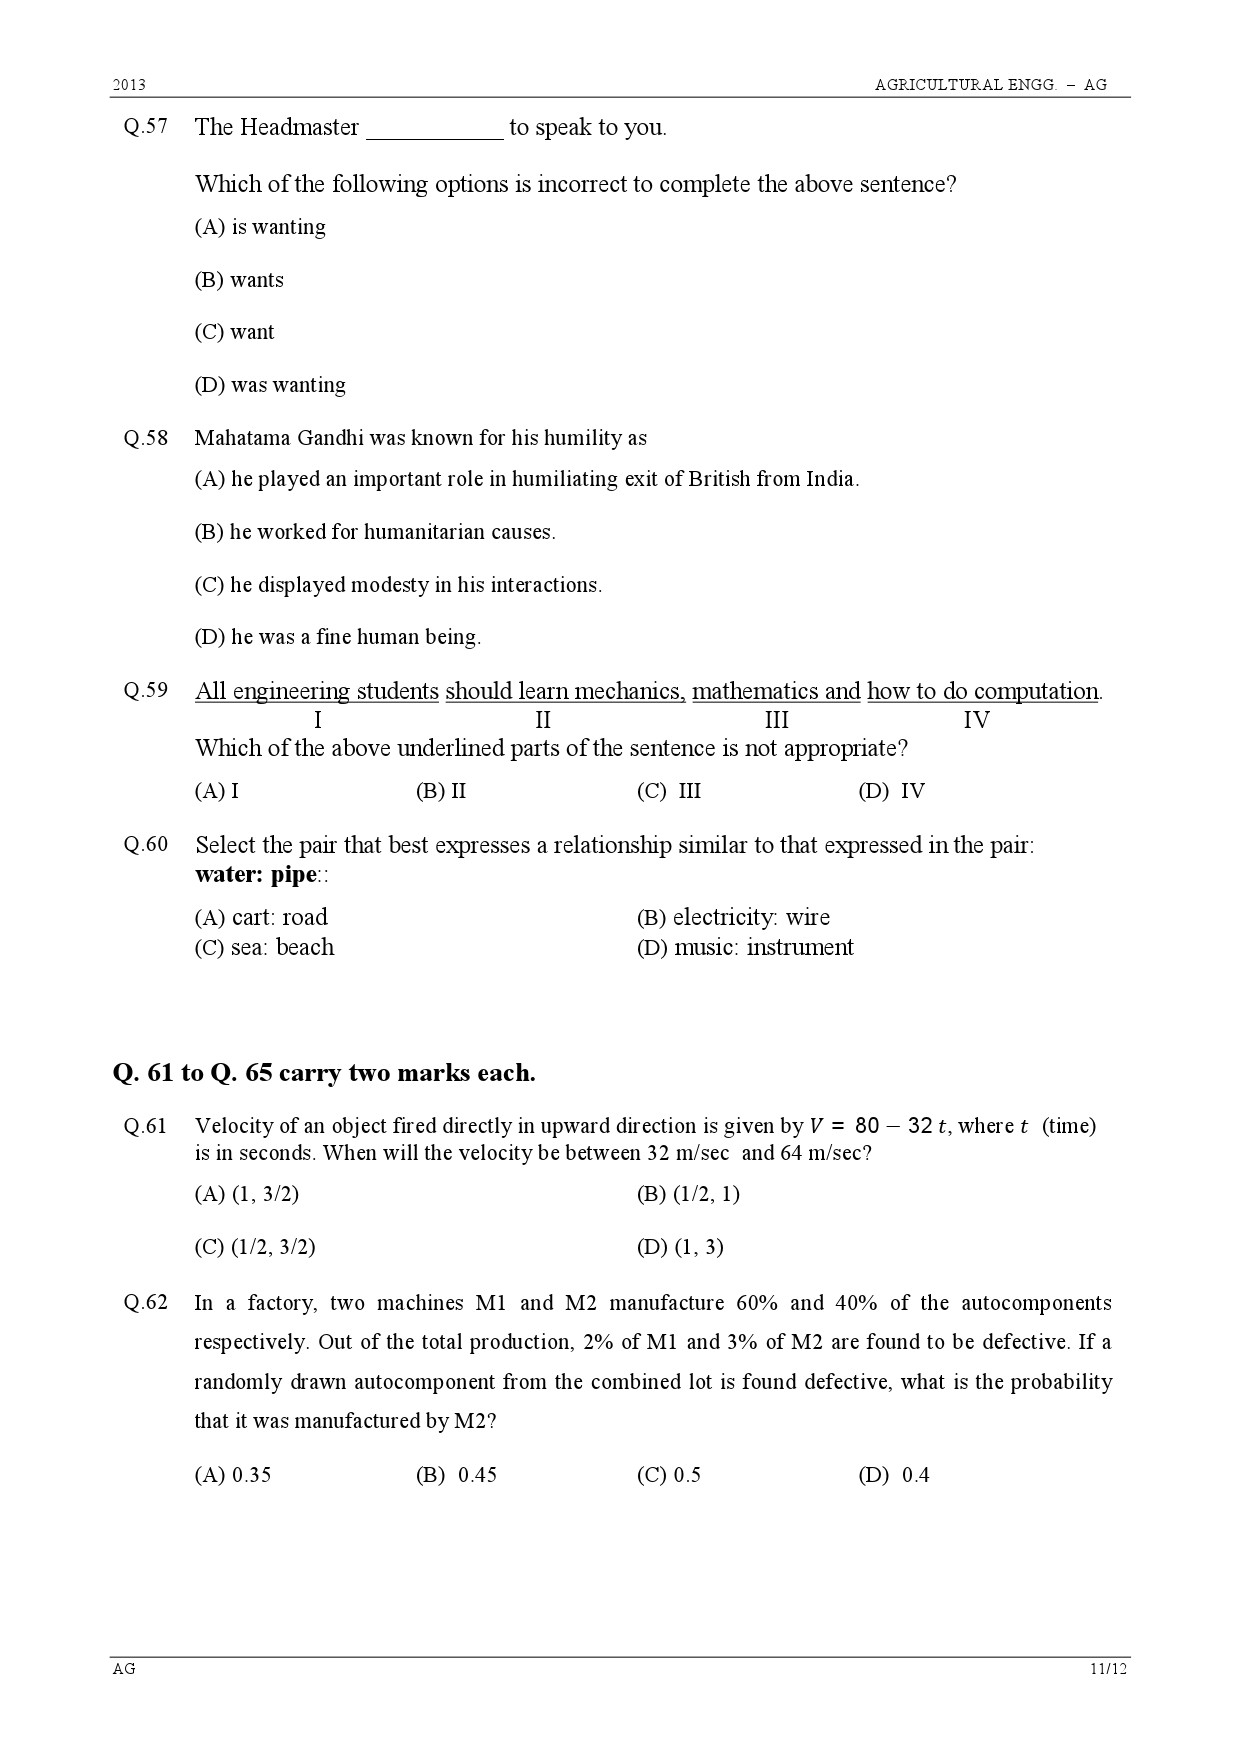 GATE Exam Question Paper 2013 Agricultural Engineering 11